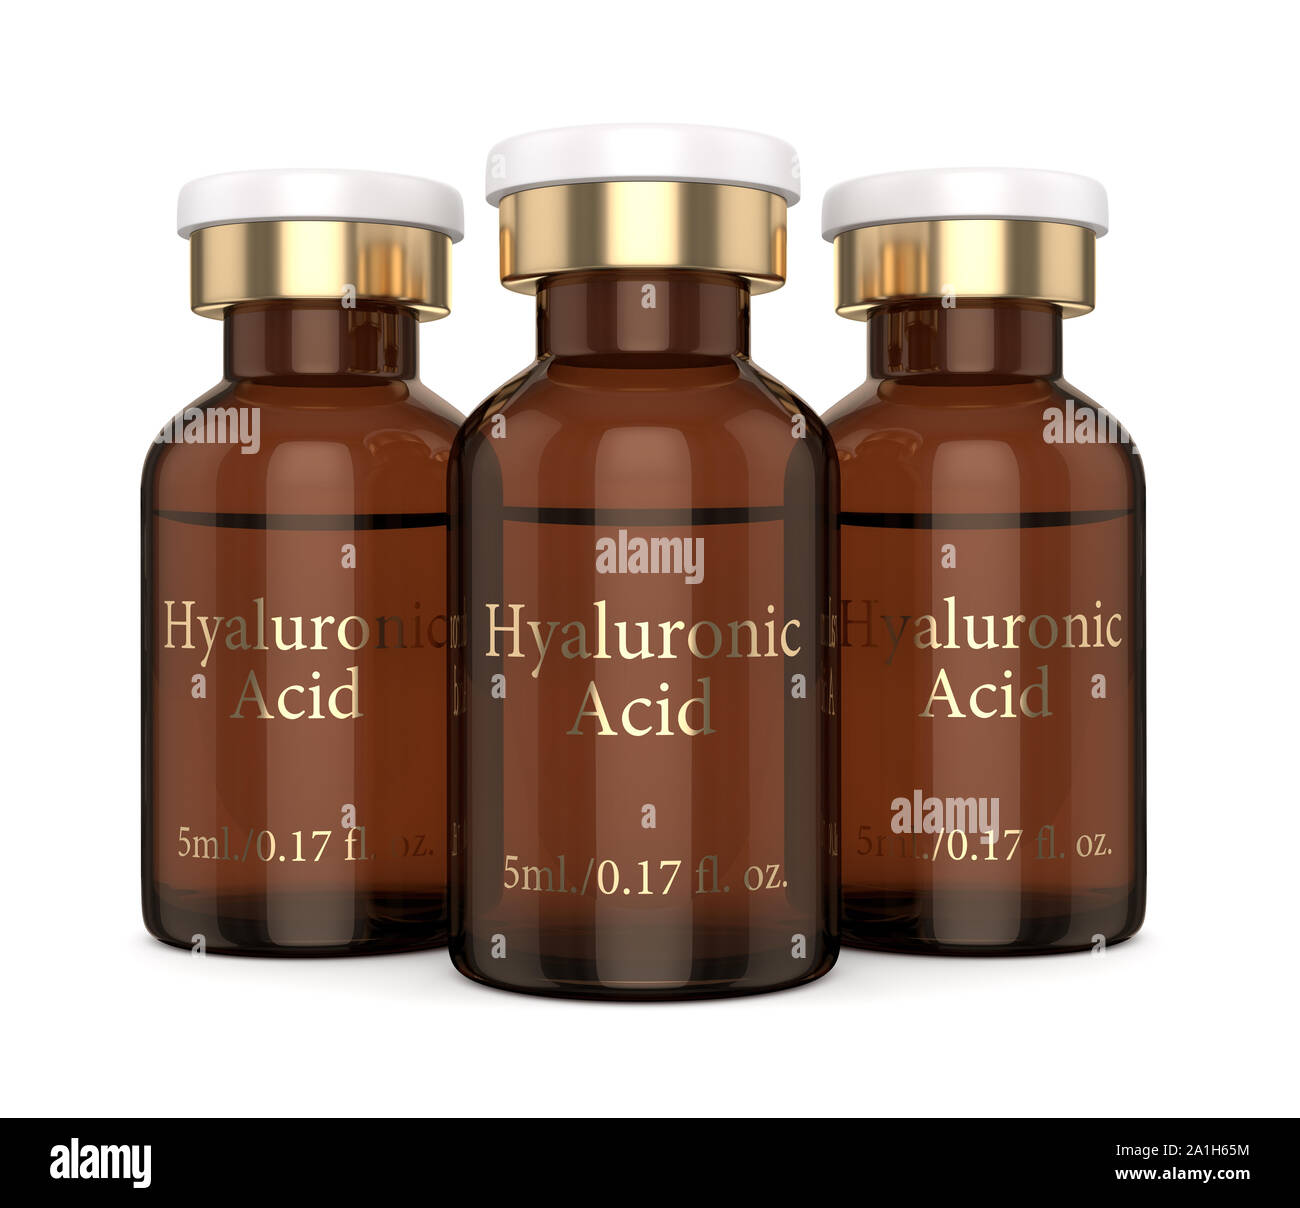 3d render of hyaluronic acid vials isolated over white background Stock Photo